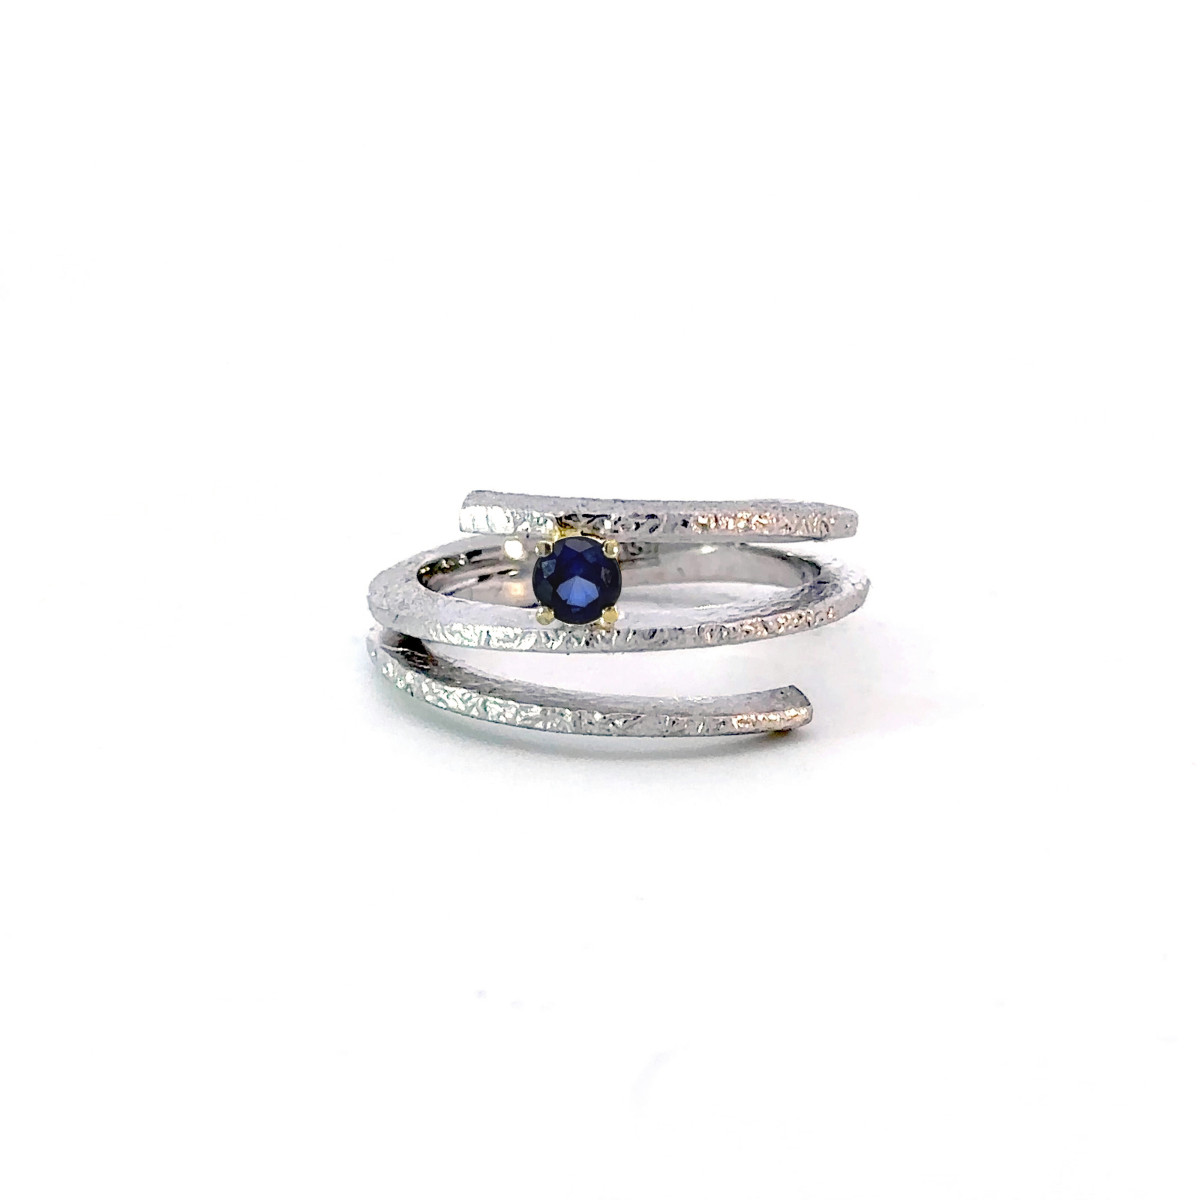 Silver, gold and sapphire ring